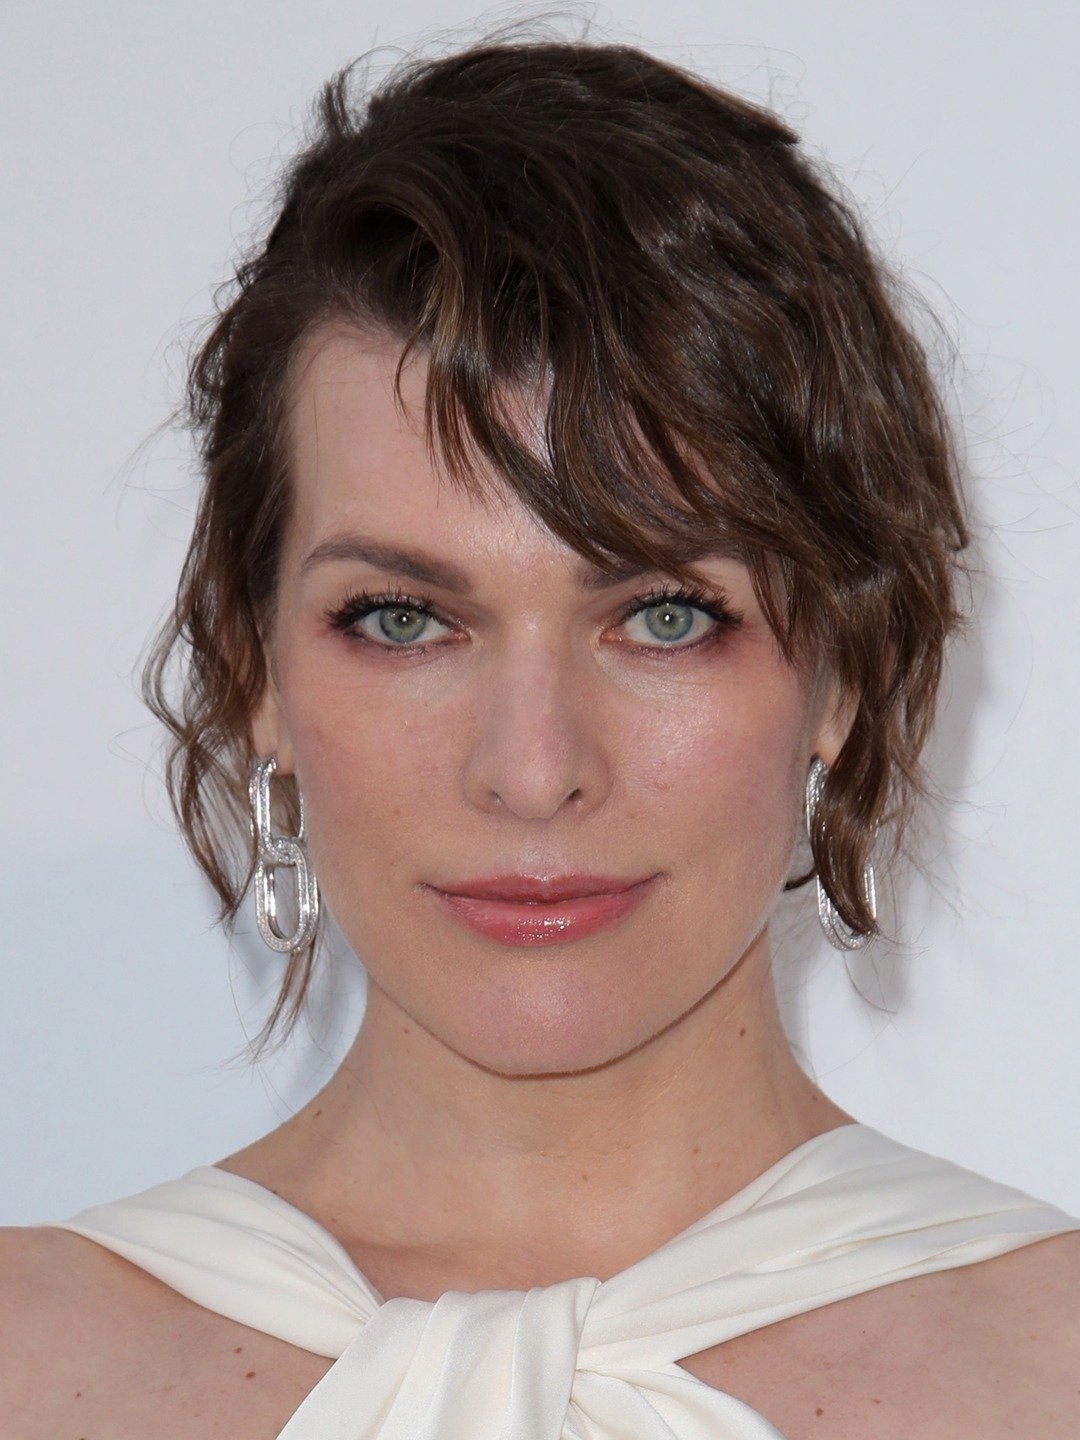 Monster Hunter: Why Milla Jovovich's Character Is From Our World